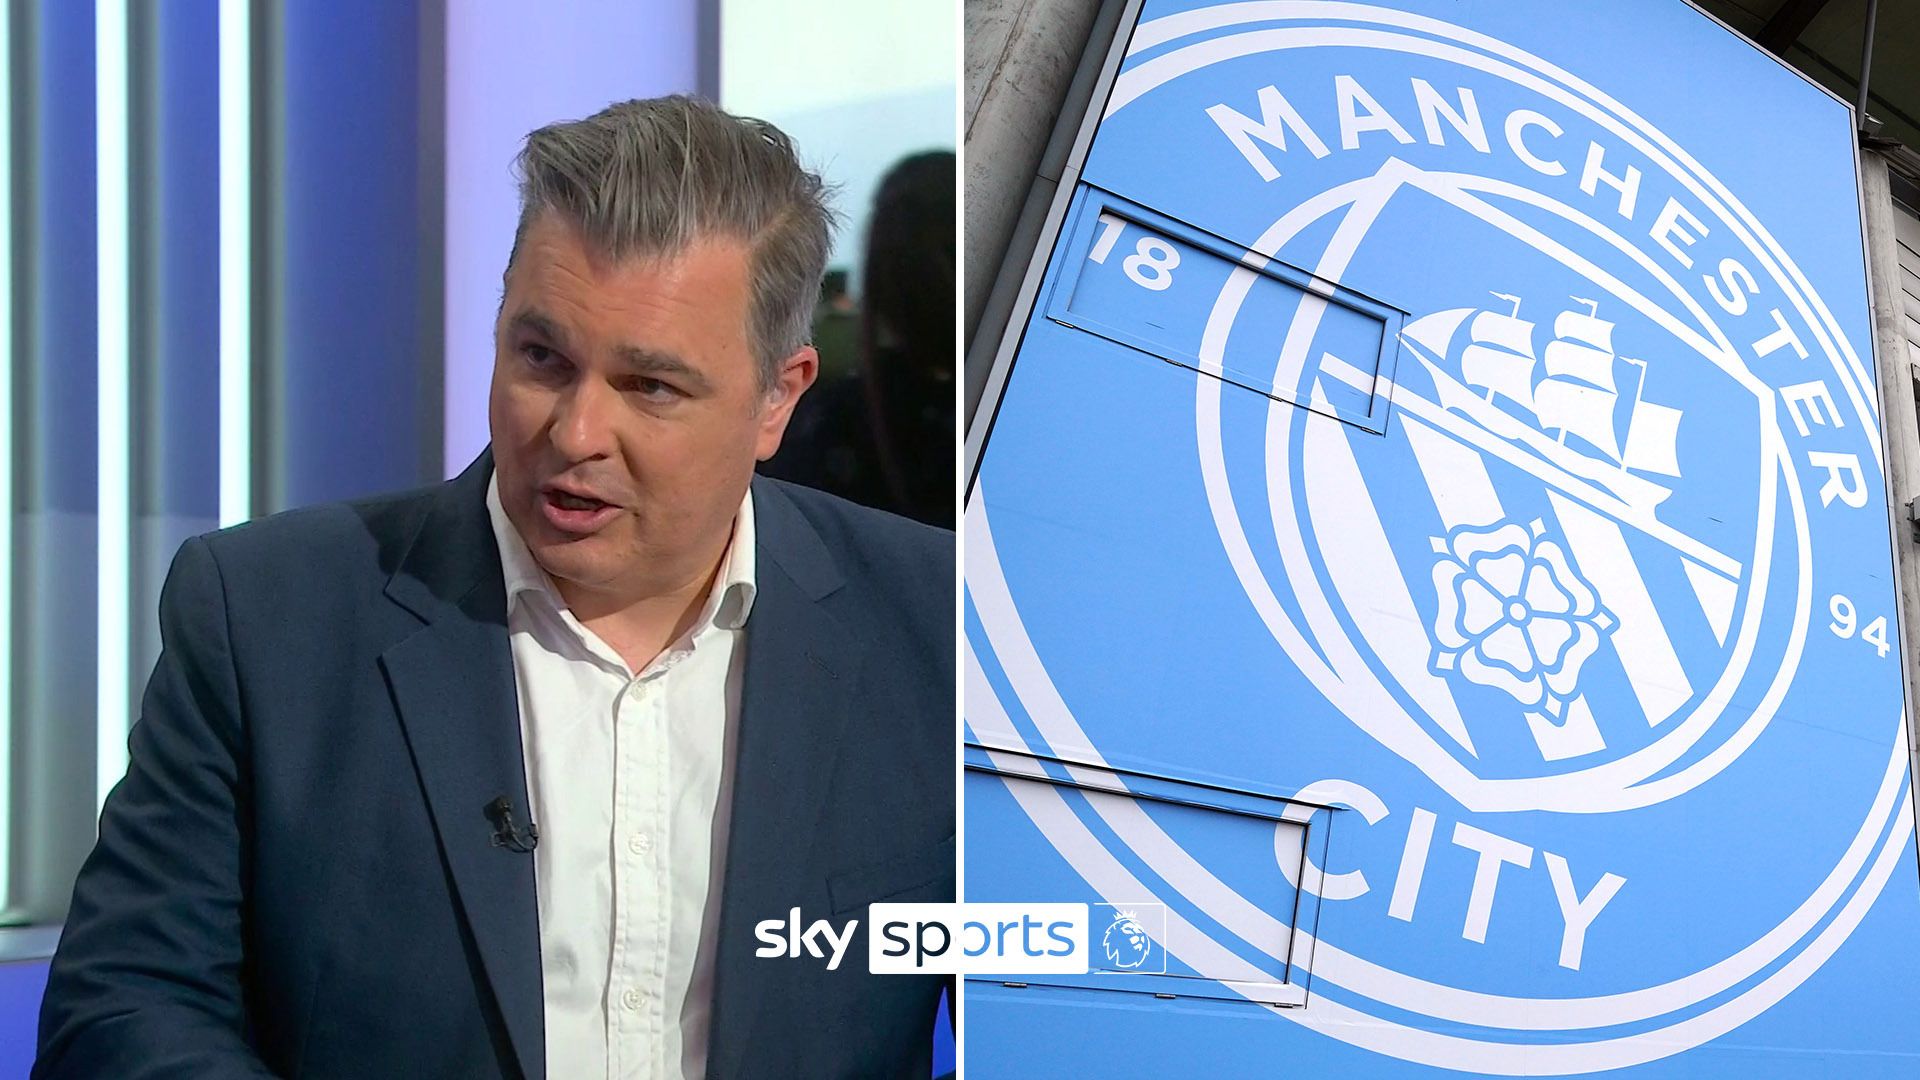 Man City vs PL latest: Will APT dispute end in a court battle?